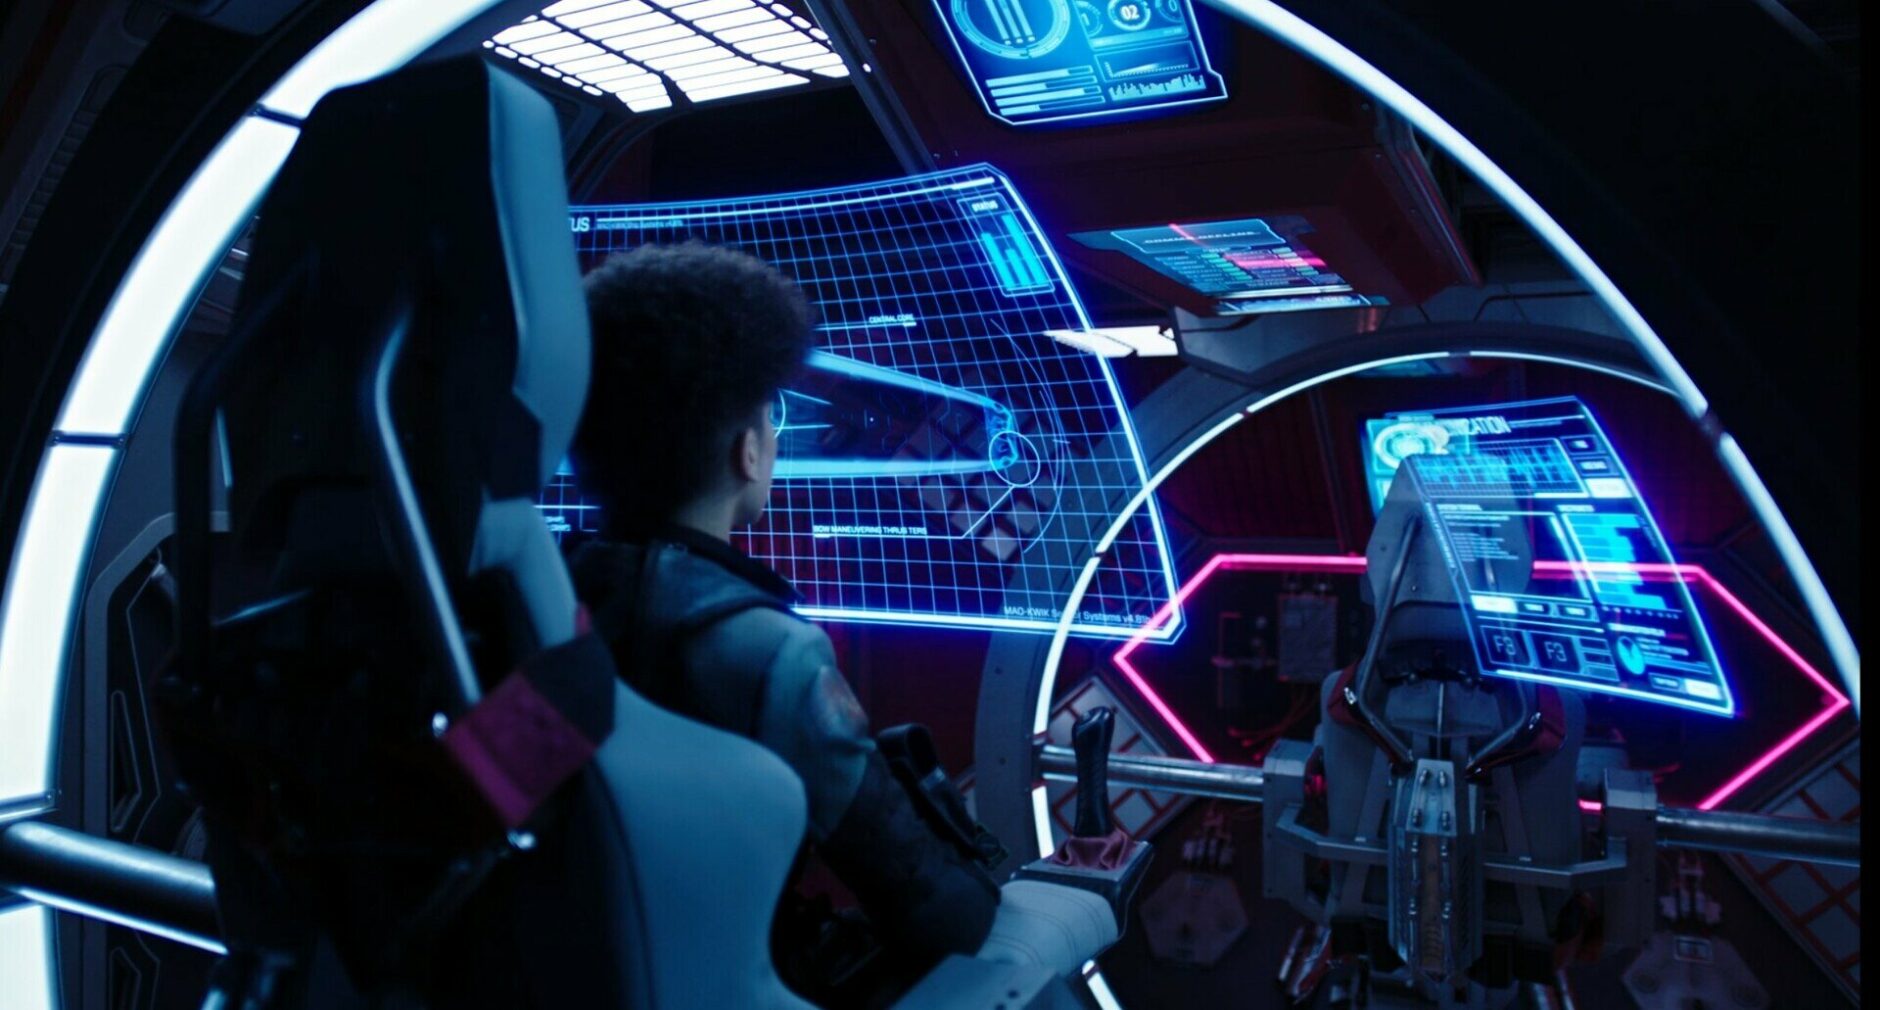 Crew members aboard the Razorback viewing floating holographic user interfaces.